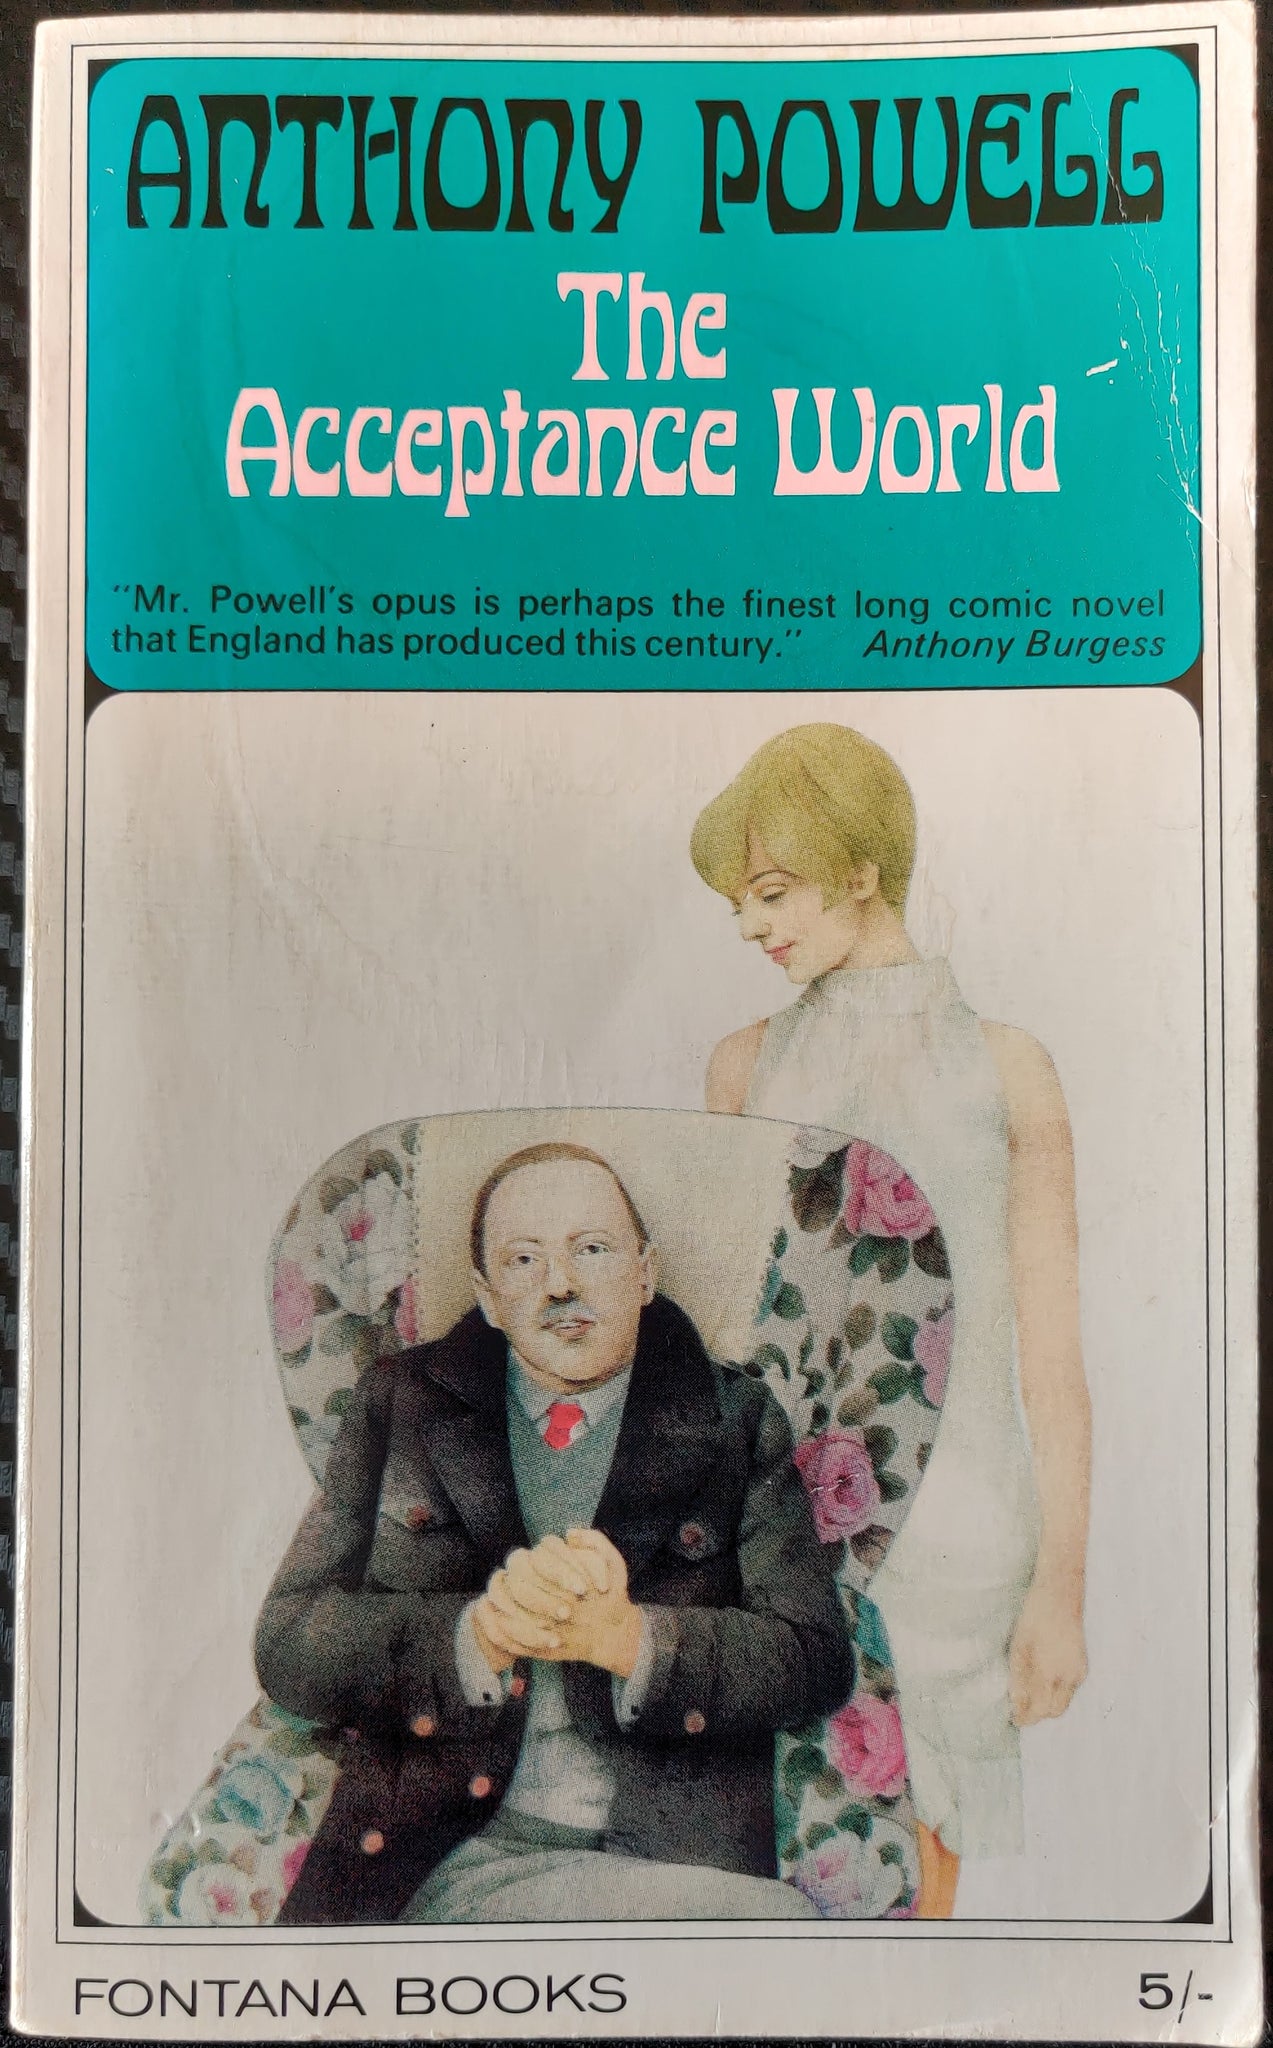 The Acceptance World by Anthony Powell